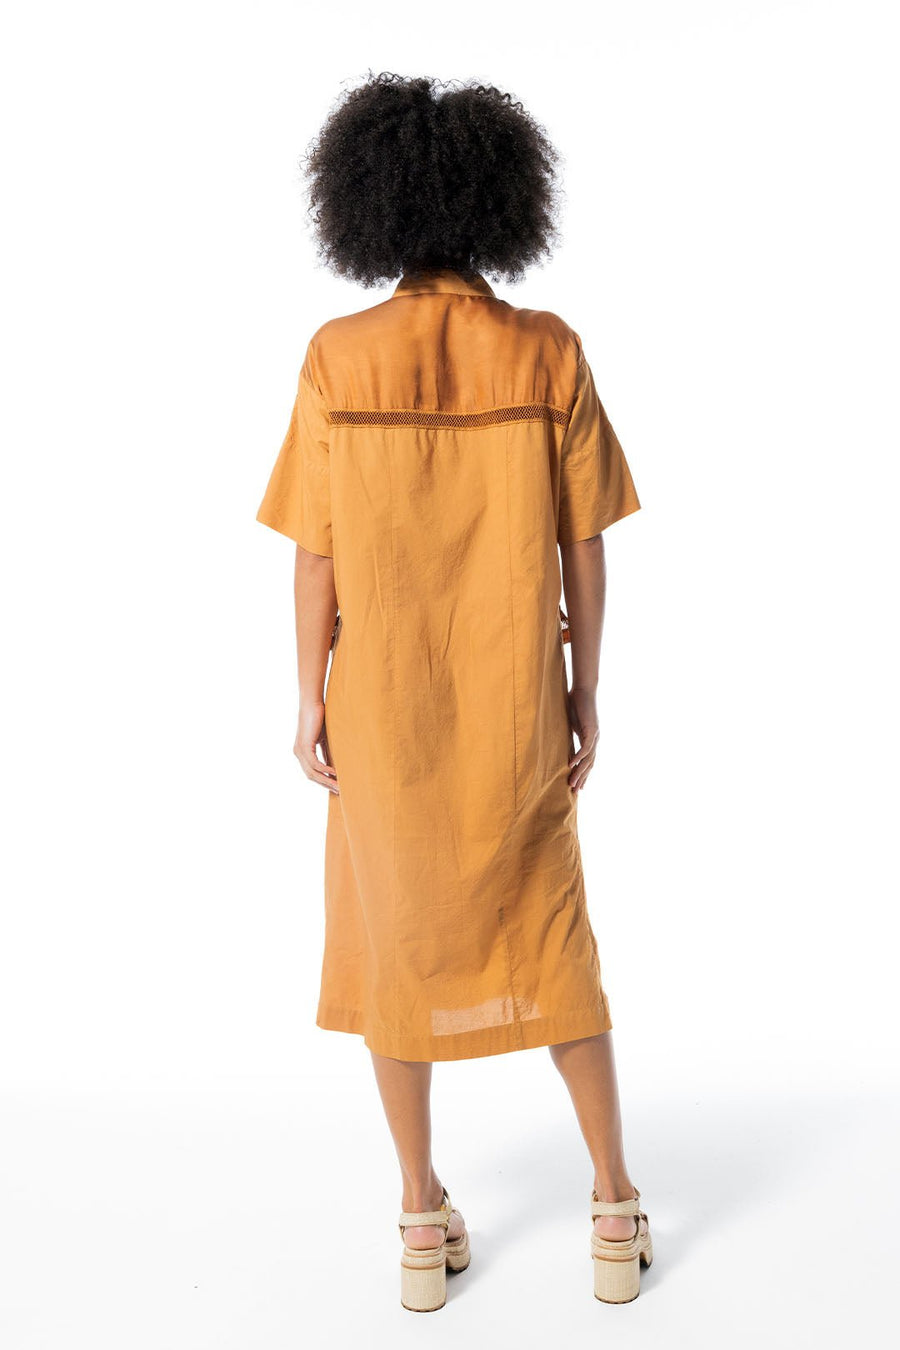 ALEXANDRIA MILITARY CAFTAN, AMBER - Burning Torch Online Boutique